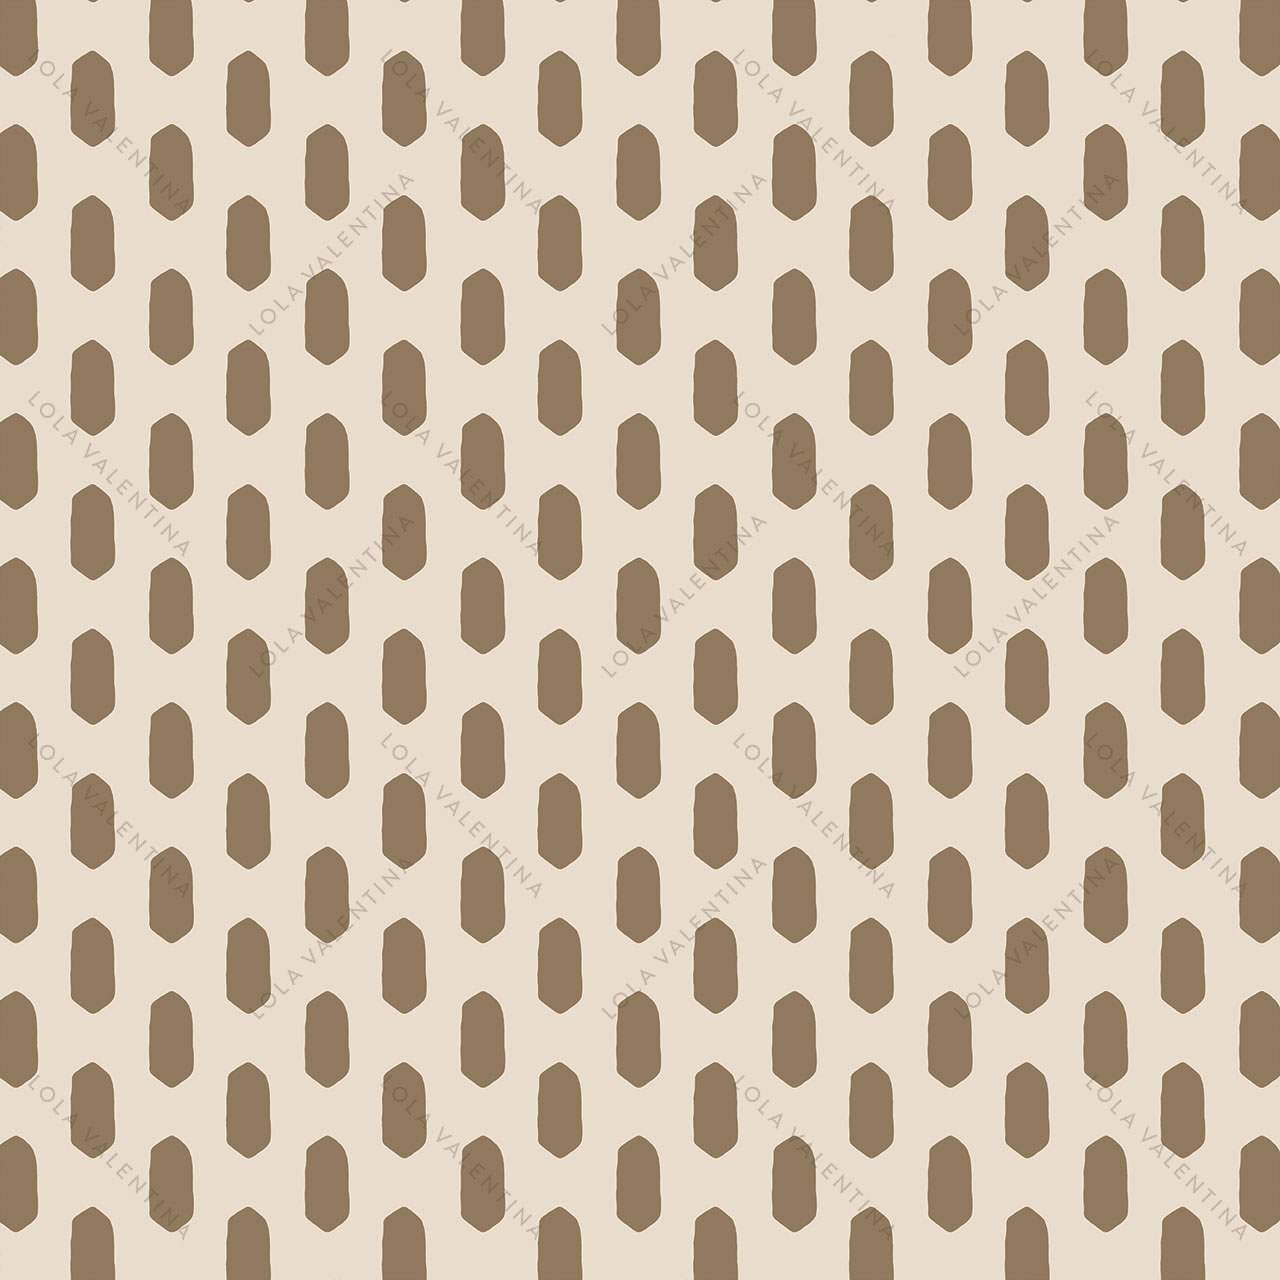 Iced-Coffee-Brown-Abstract-Oval-Shapes-Ivory-Pattern